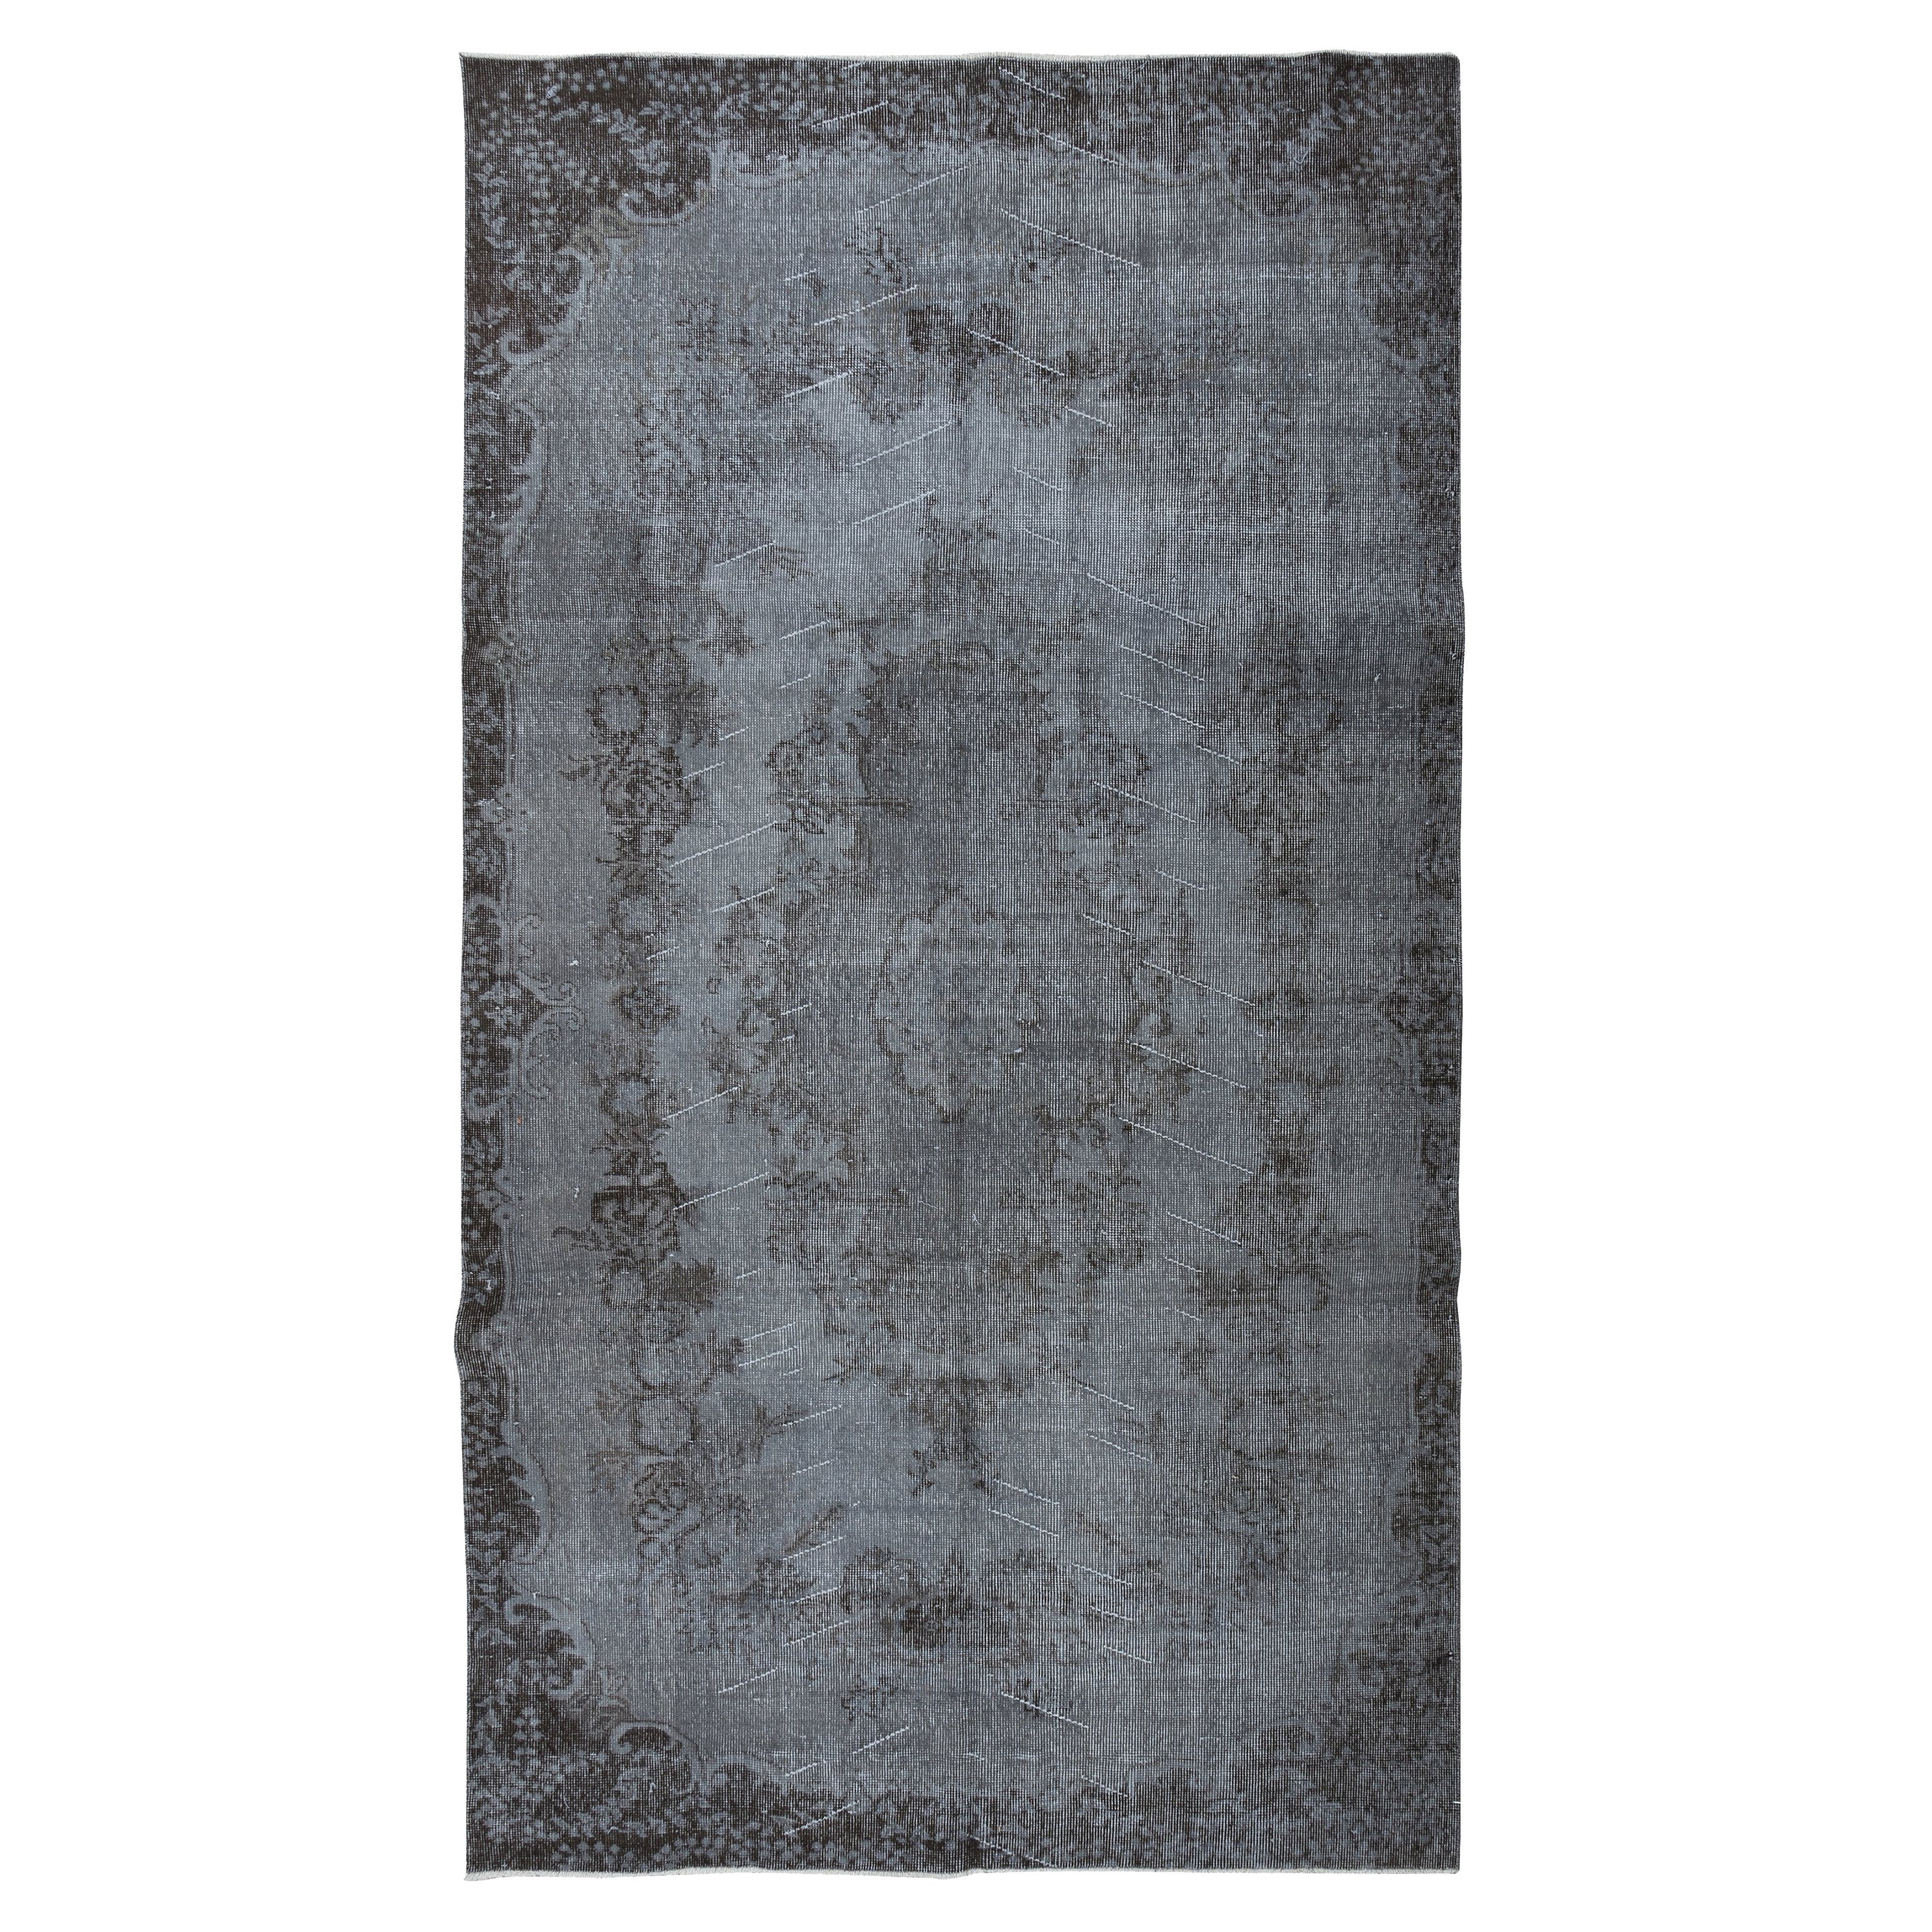 5.5x9.8 Ft Contemporary Overdyed Hand Knotted Wool Grey Area Rug from Turkey